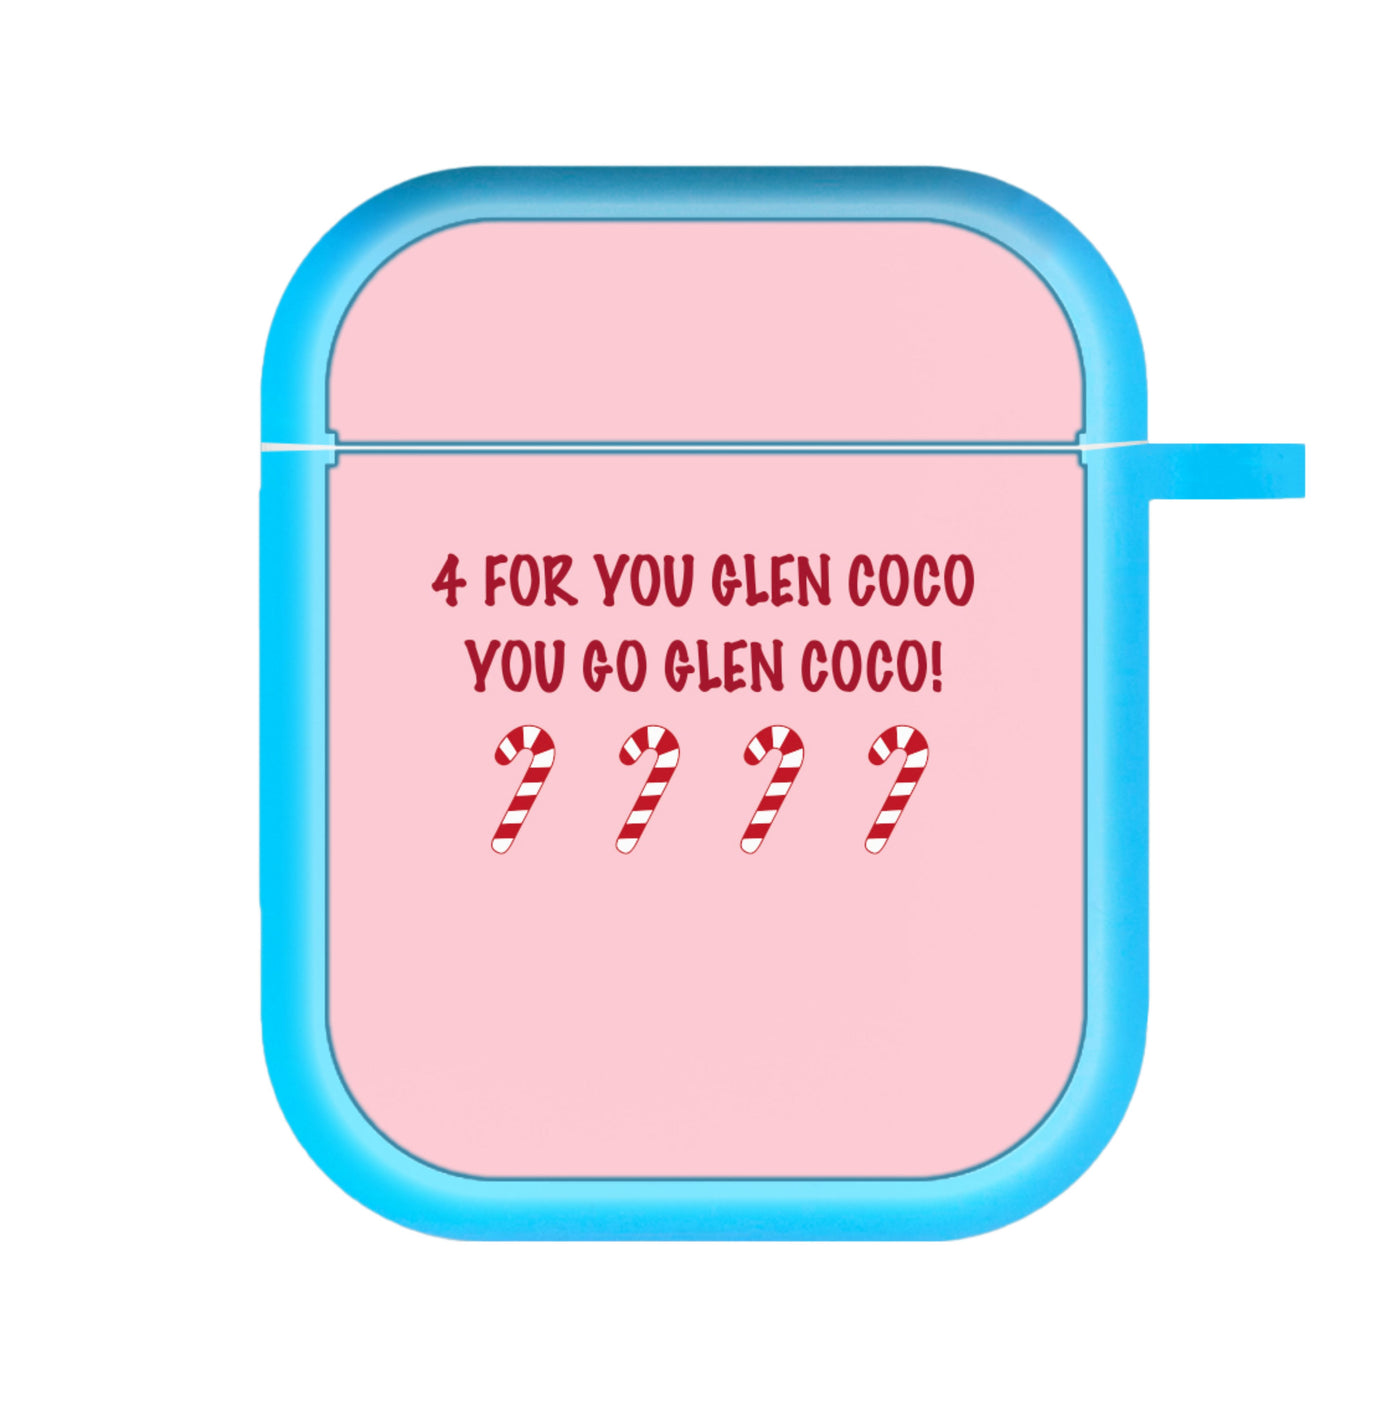 Four For You Glen Coco - Mean Girls AirPods Case